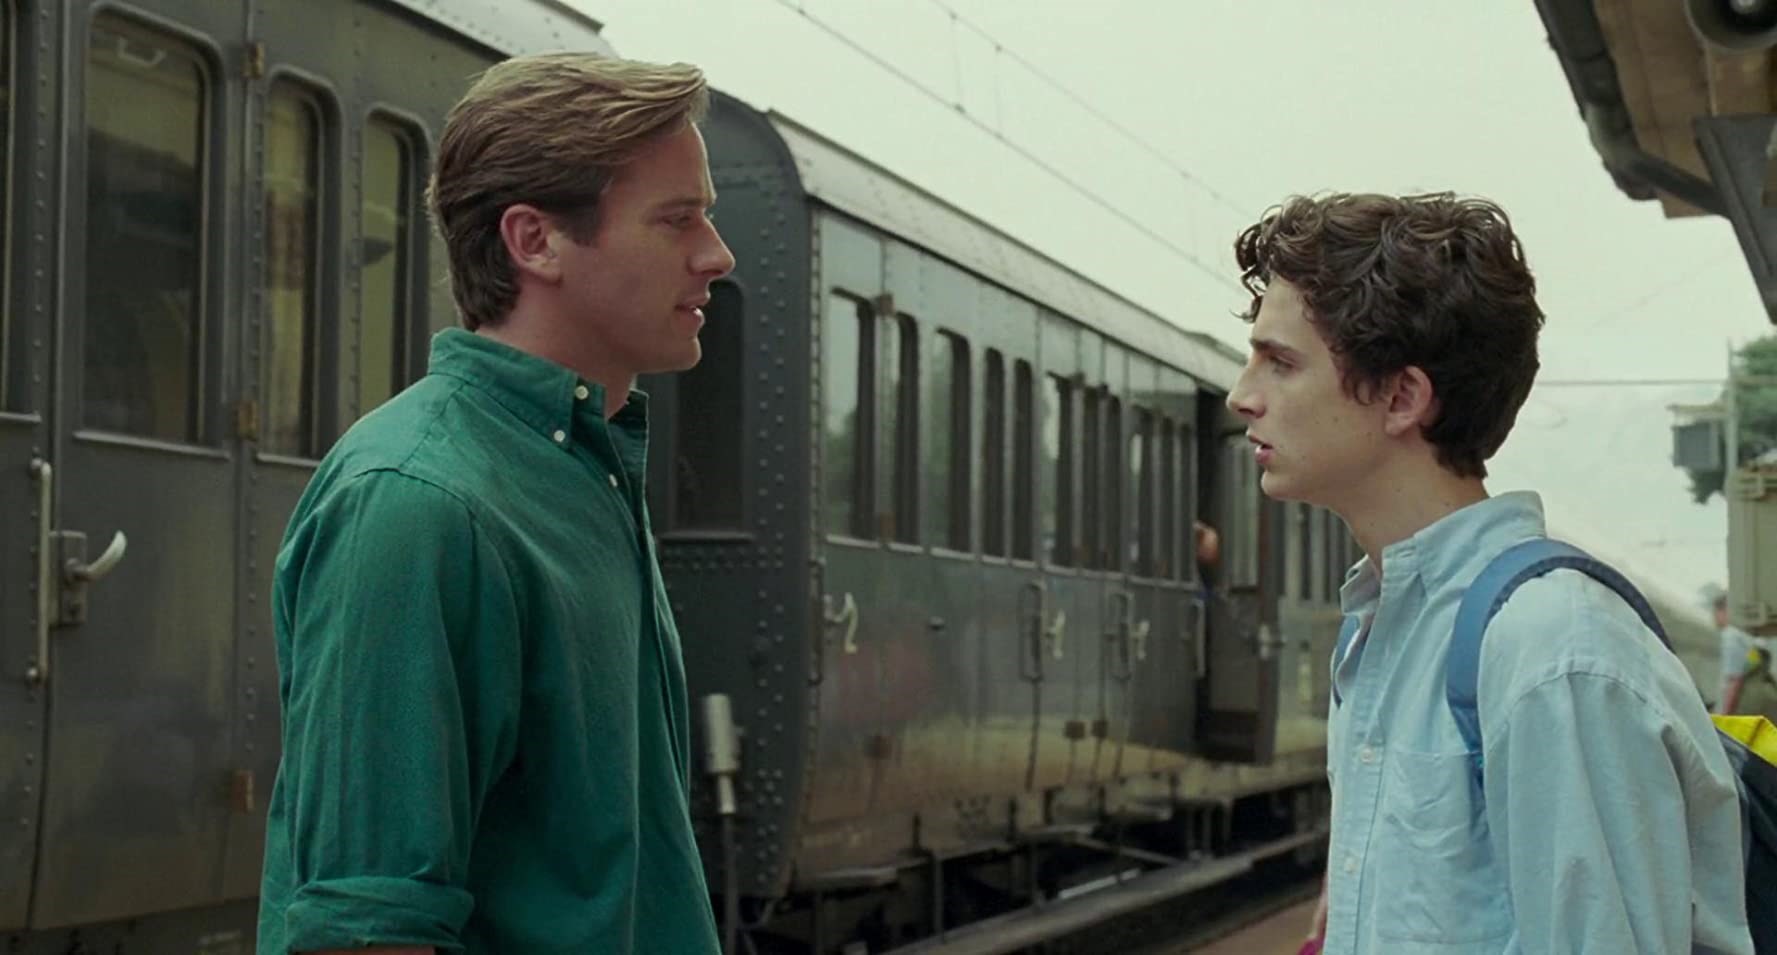 Timothee Chalamet, Armie Hammer in 'Call Me By Your Name' sequel